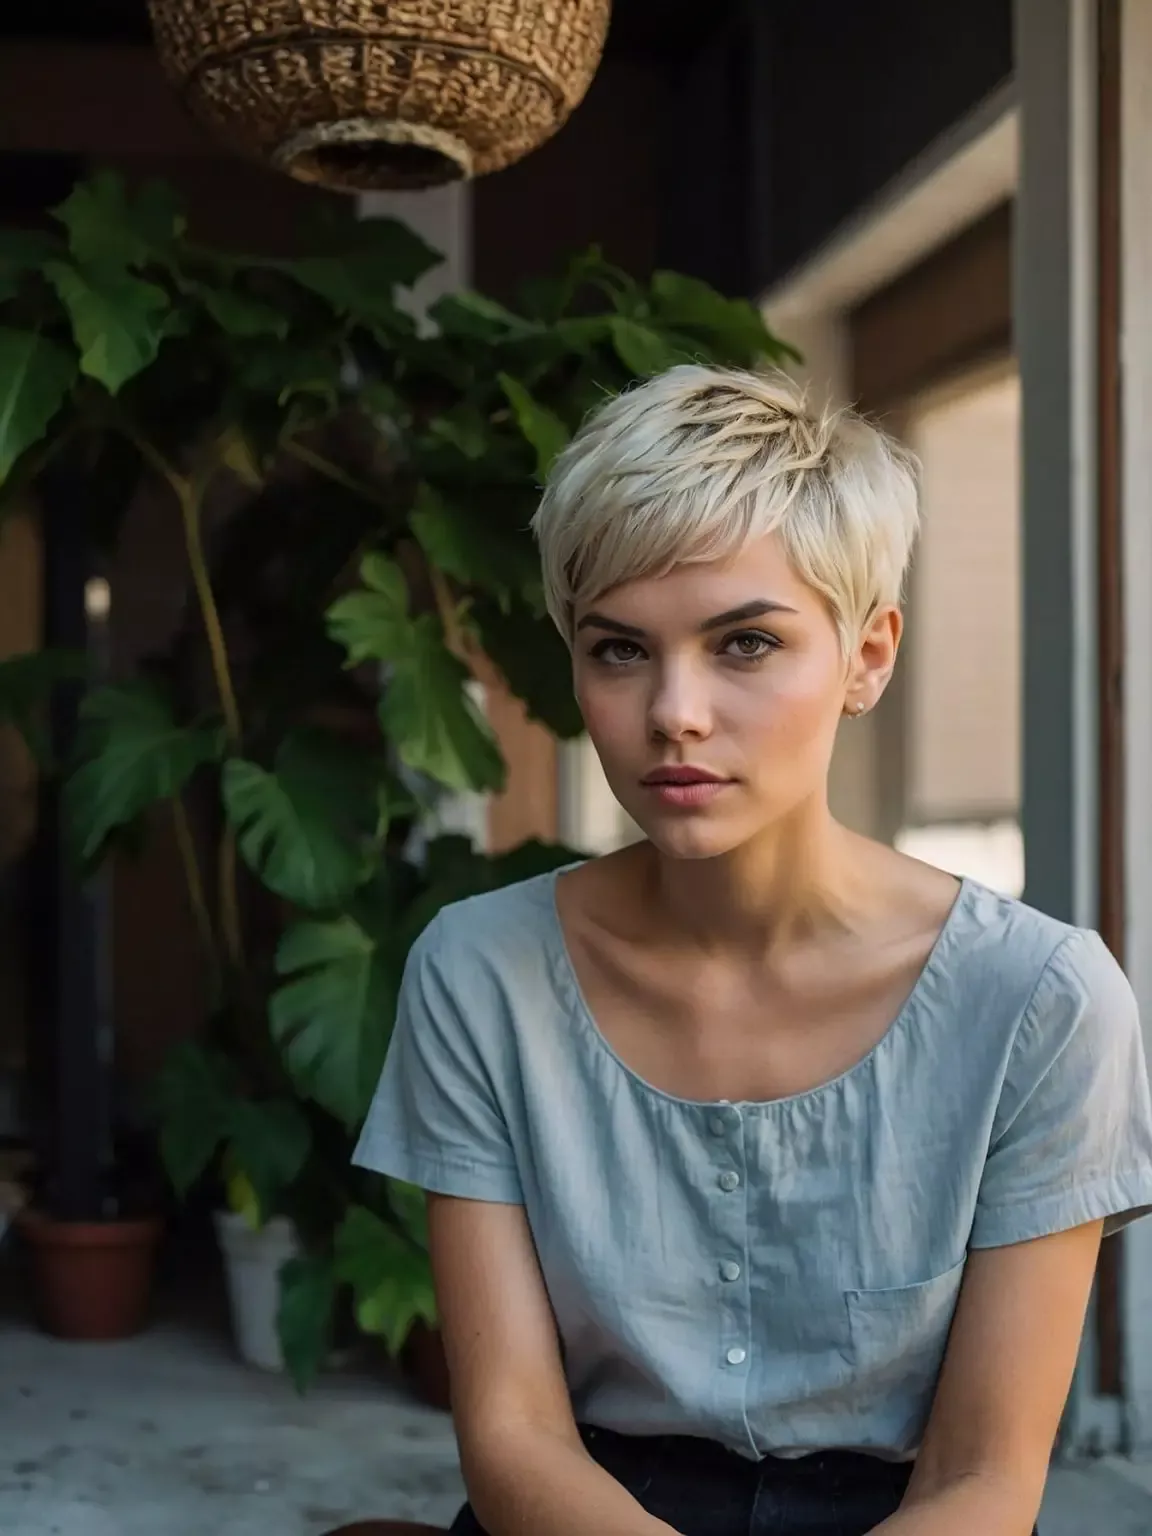 Chic and Stylish Short Hairstyles for Women: Find Your Perfect Look